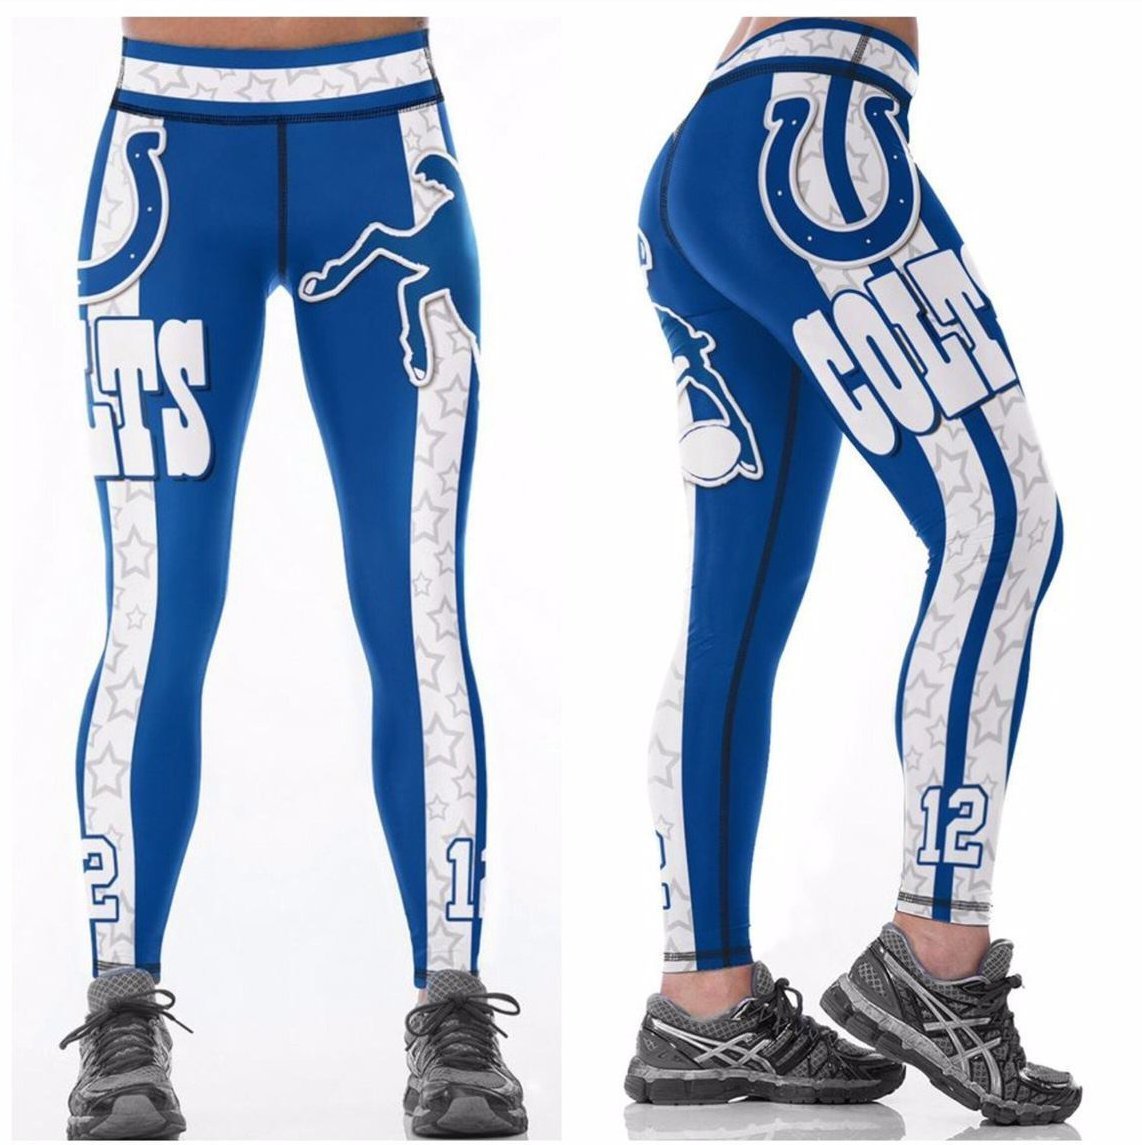 INDIANAPOLIS COLTS Leggings #12 - Higher Quality NFL Fan Gear - Team Spirit - $39.99